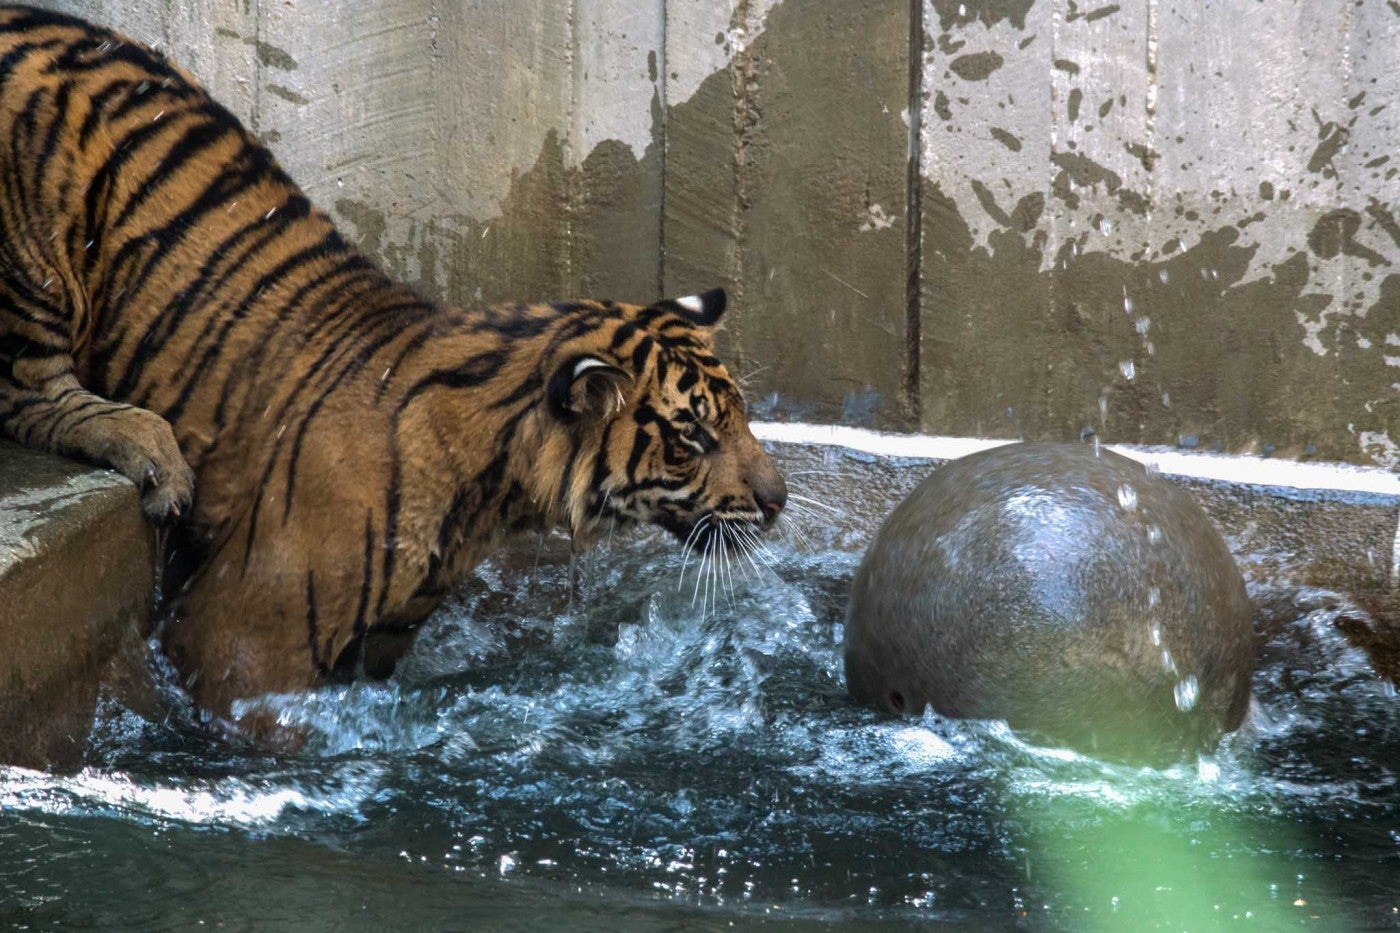 Male Sumatran tiger, Bandar, starts to enter the water after a grey-brown boomer ball. Bandar's back paws are still on dry land, while his front paws and legs are submerged in this yard's moat. He is looking at the boomer ball floating on the water.